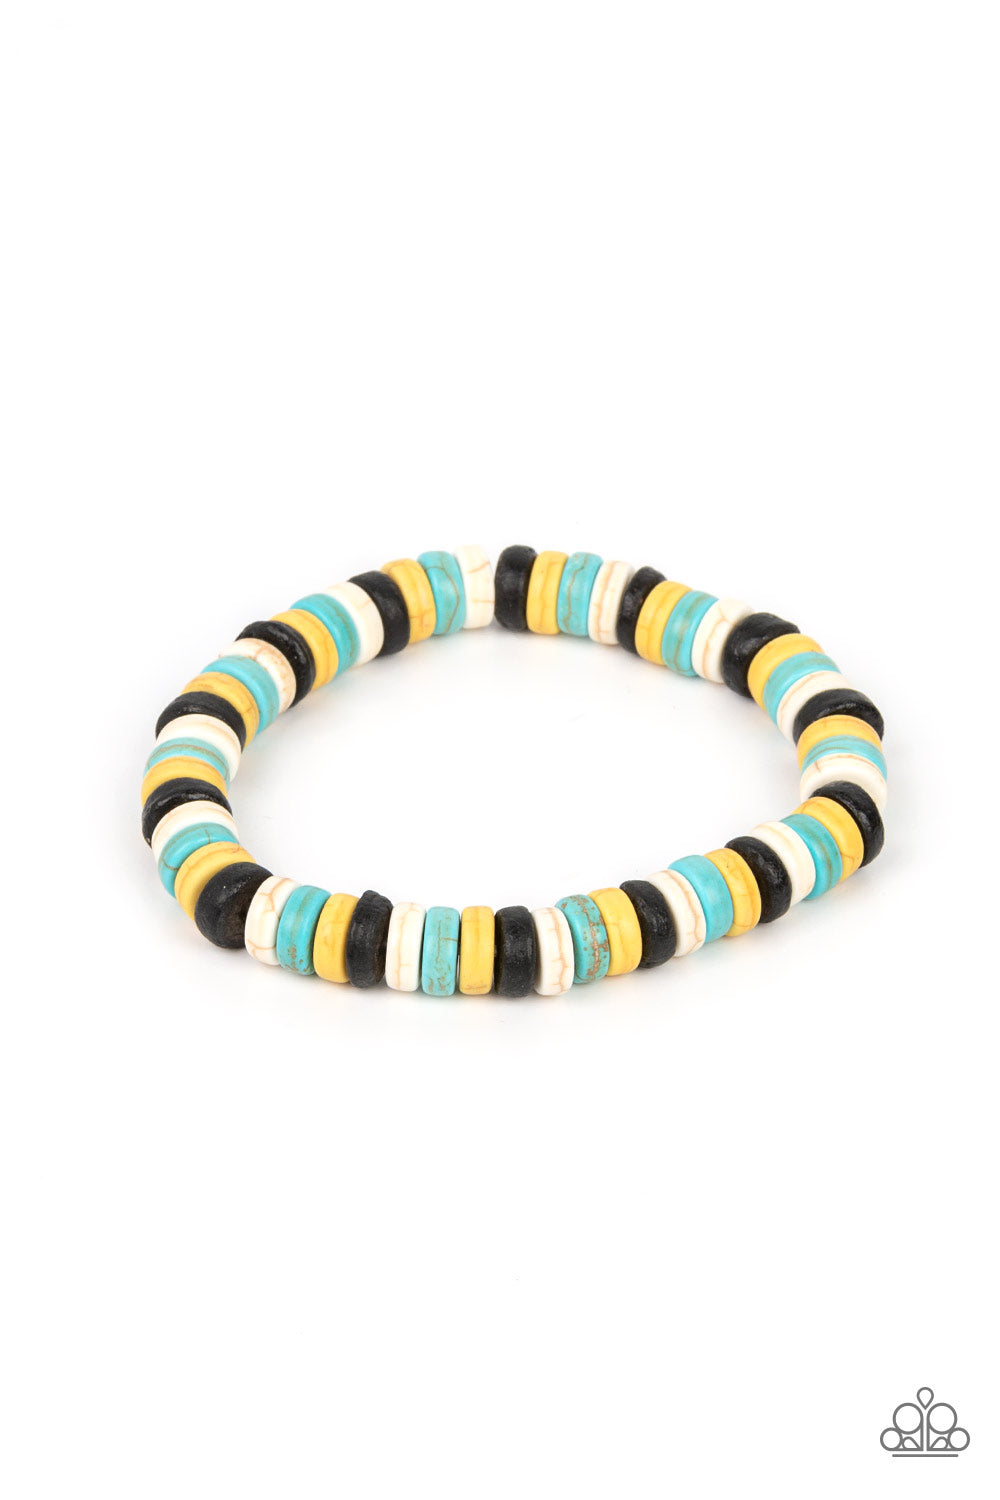 Rural Rocker Blue Bracelet - Paparazzi Accessories  Imperfect black, yellow, turquoise, and white stone discs are threaded along stretchy bands, creating an earthy pop of color around the wrist.  Sold as one individual bracelet.  P9SE-URBL-212XX